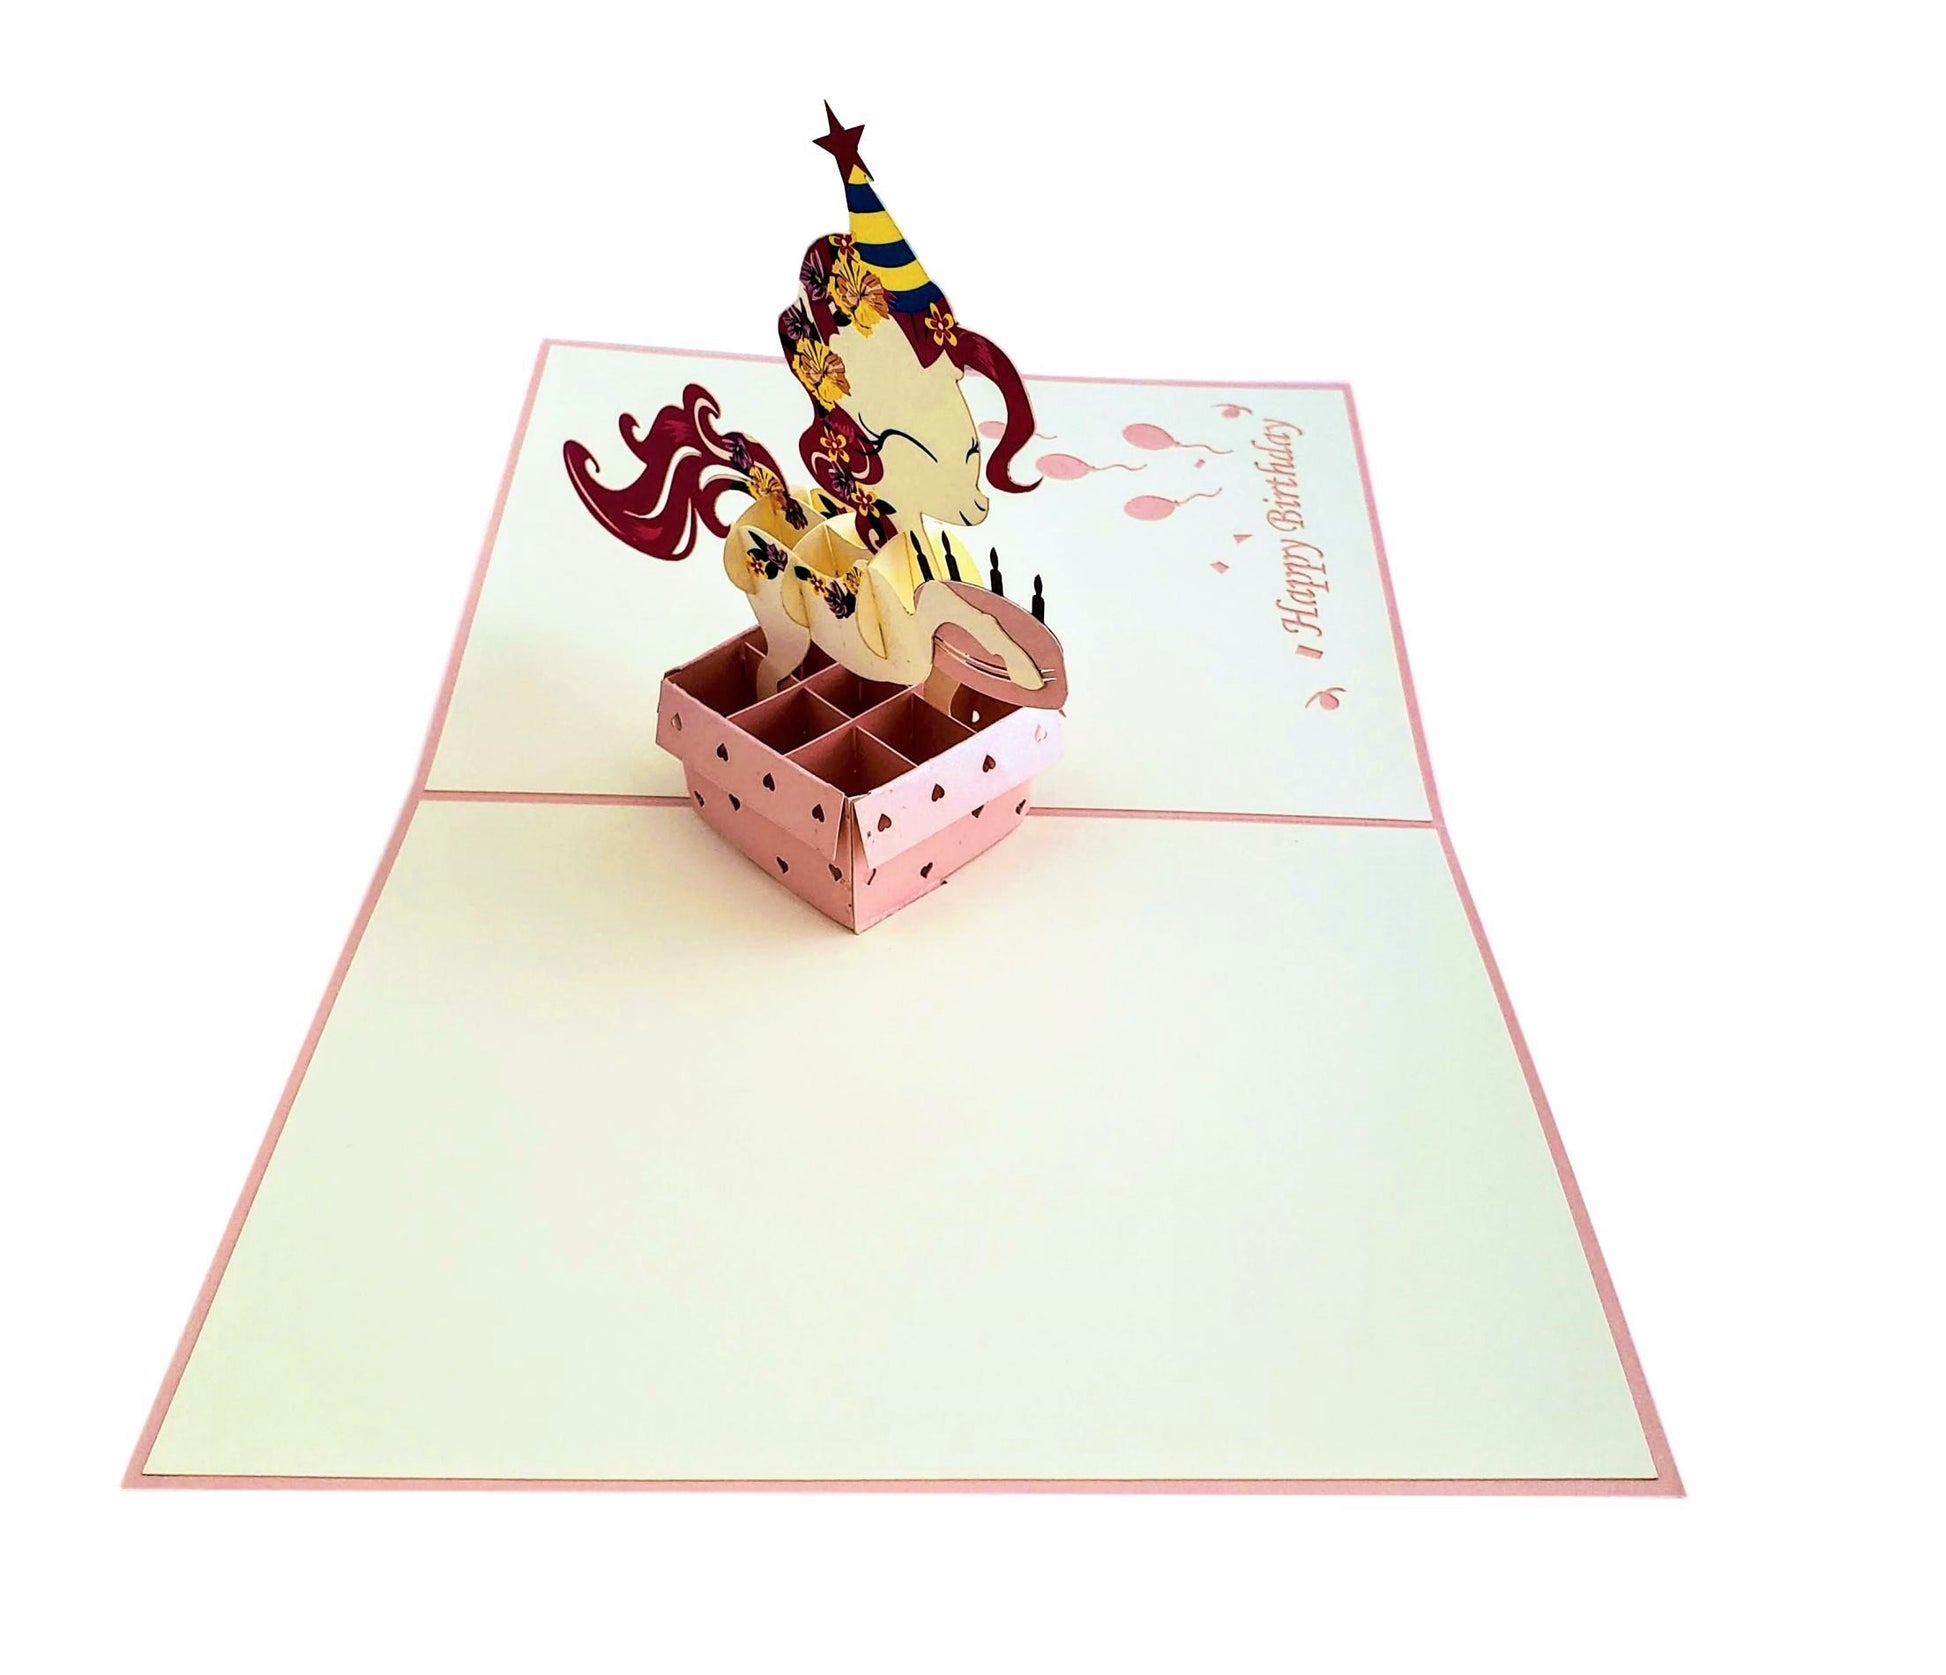 Little Pony 3D Pop Up Greeting Card - Animal - Animals - Awesome - best wishes - Birthday - Celebrat - iGifts And Cards